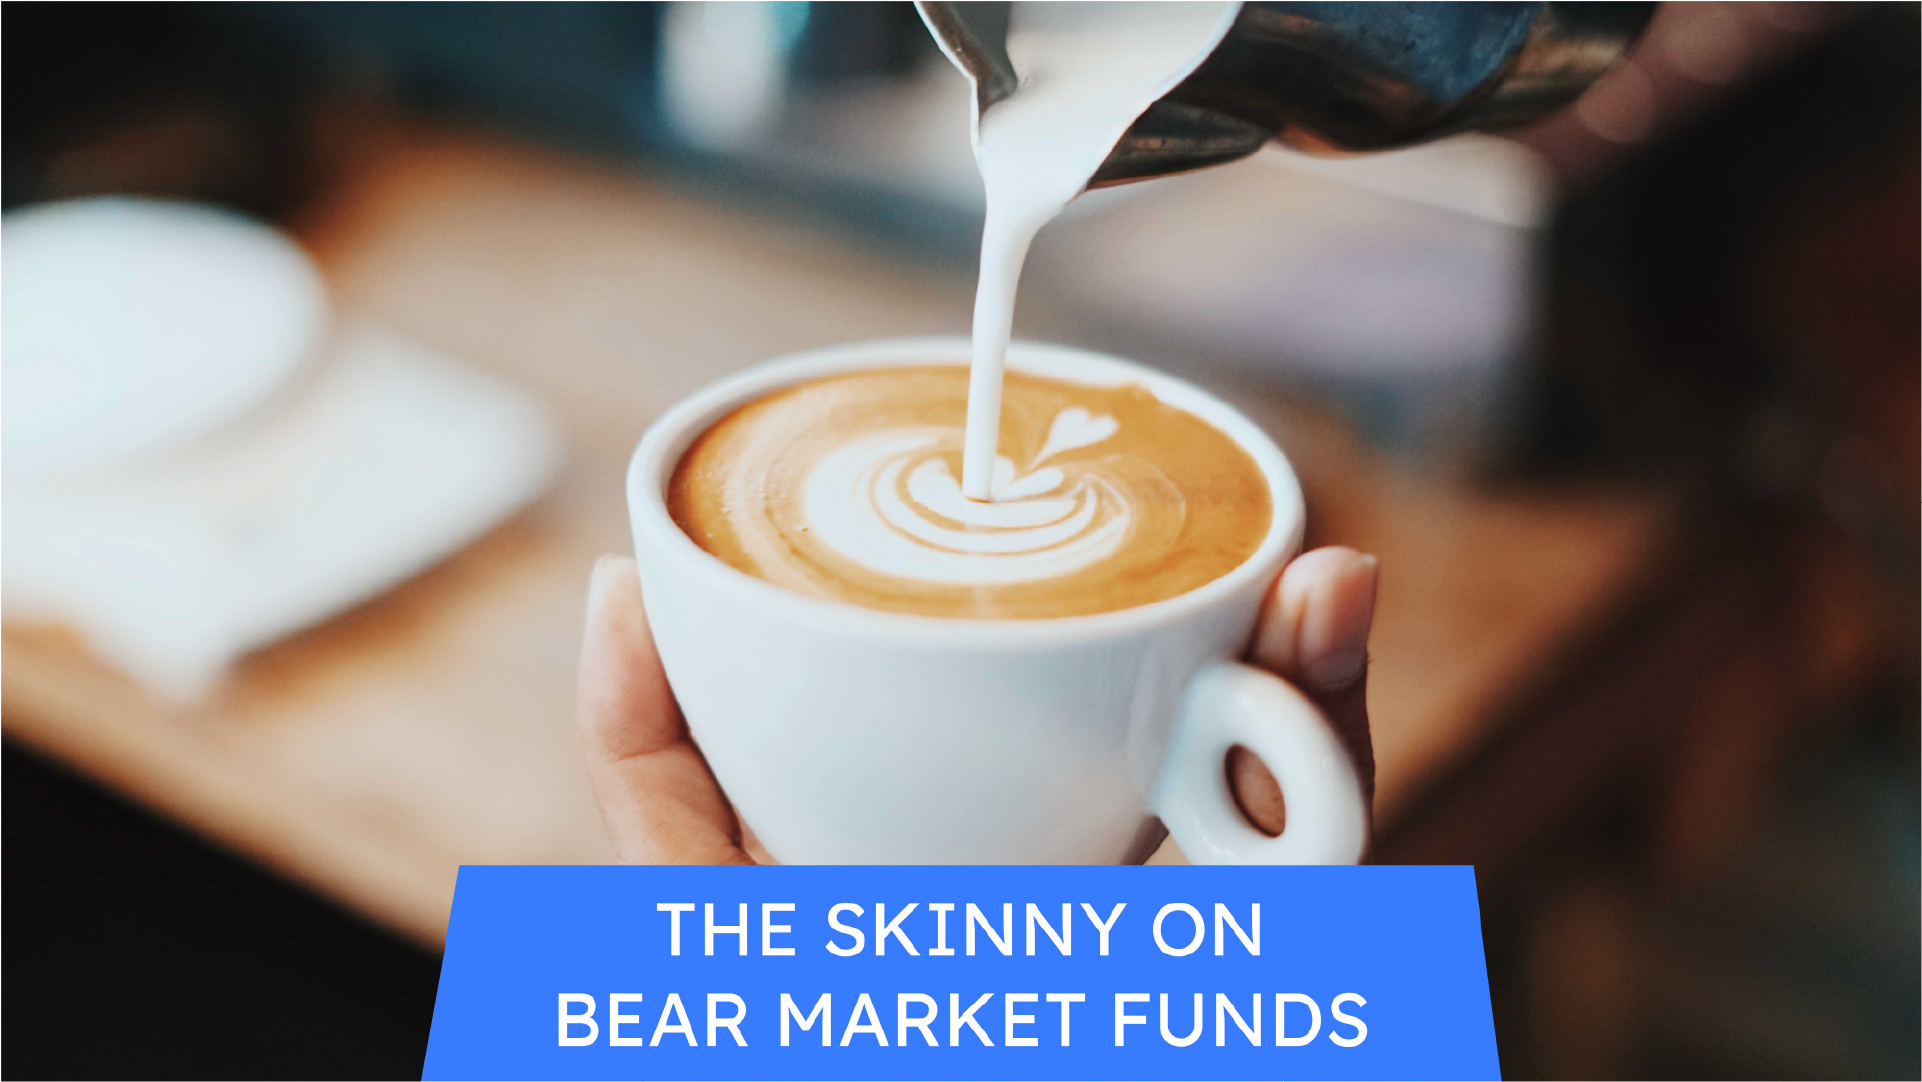 The Skinny on Bear Market Funds